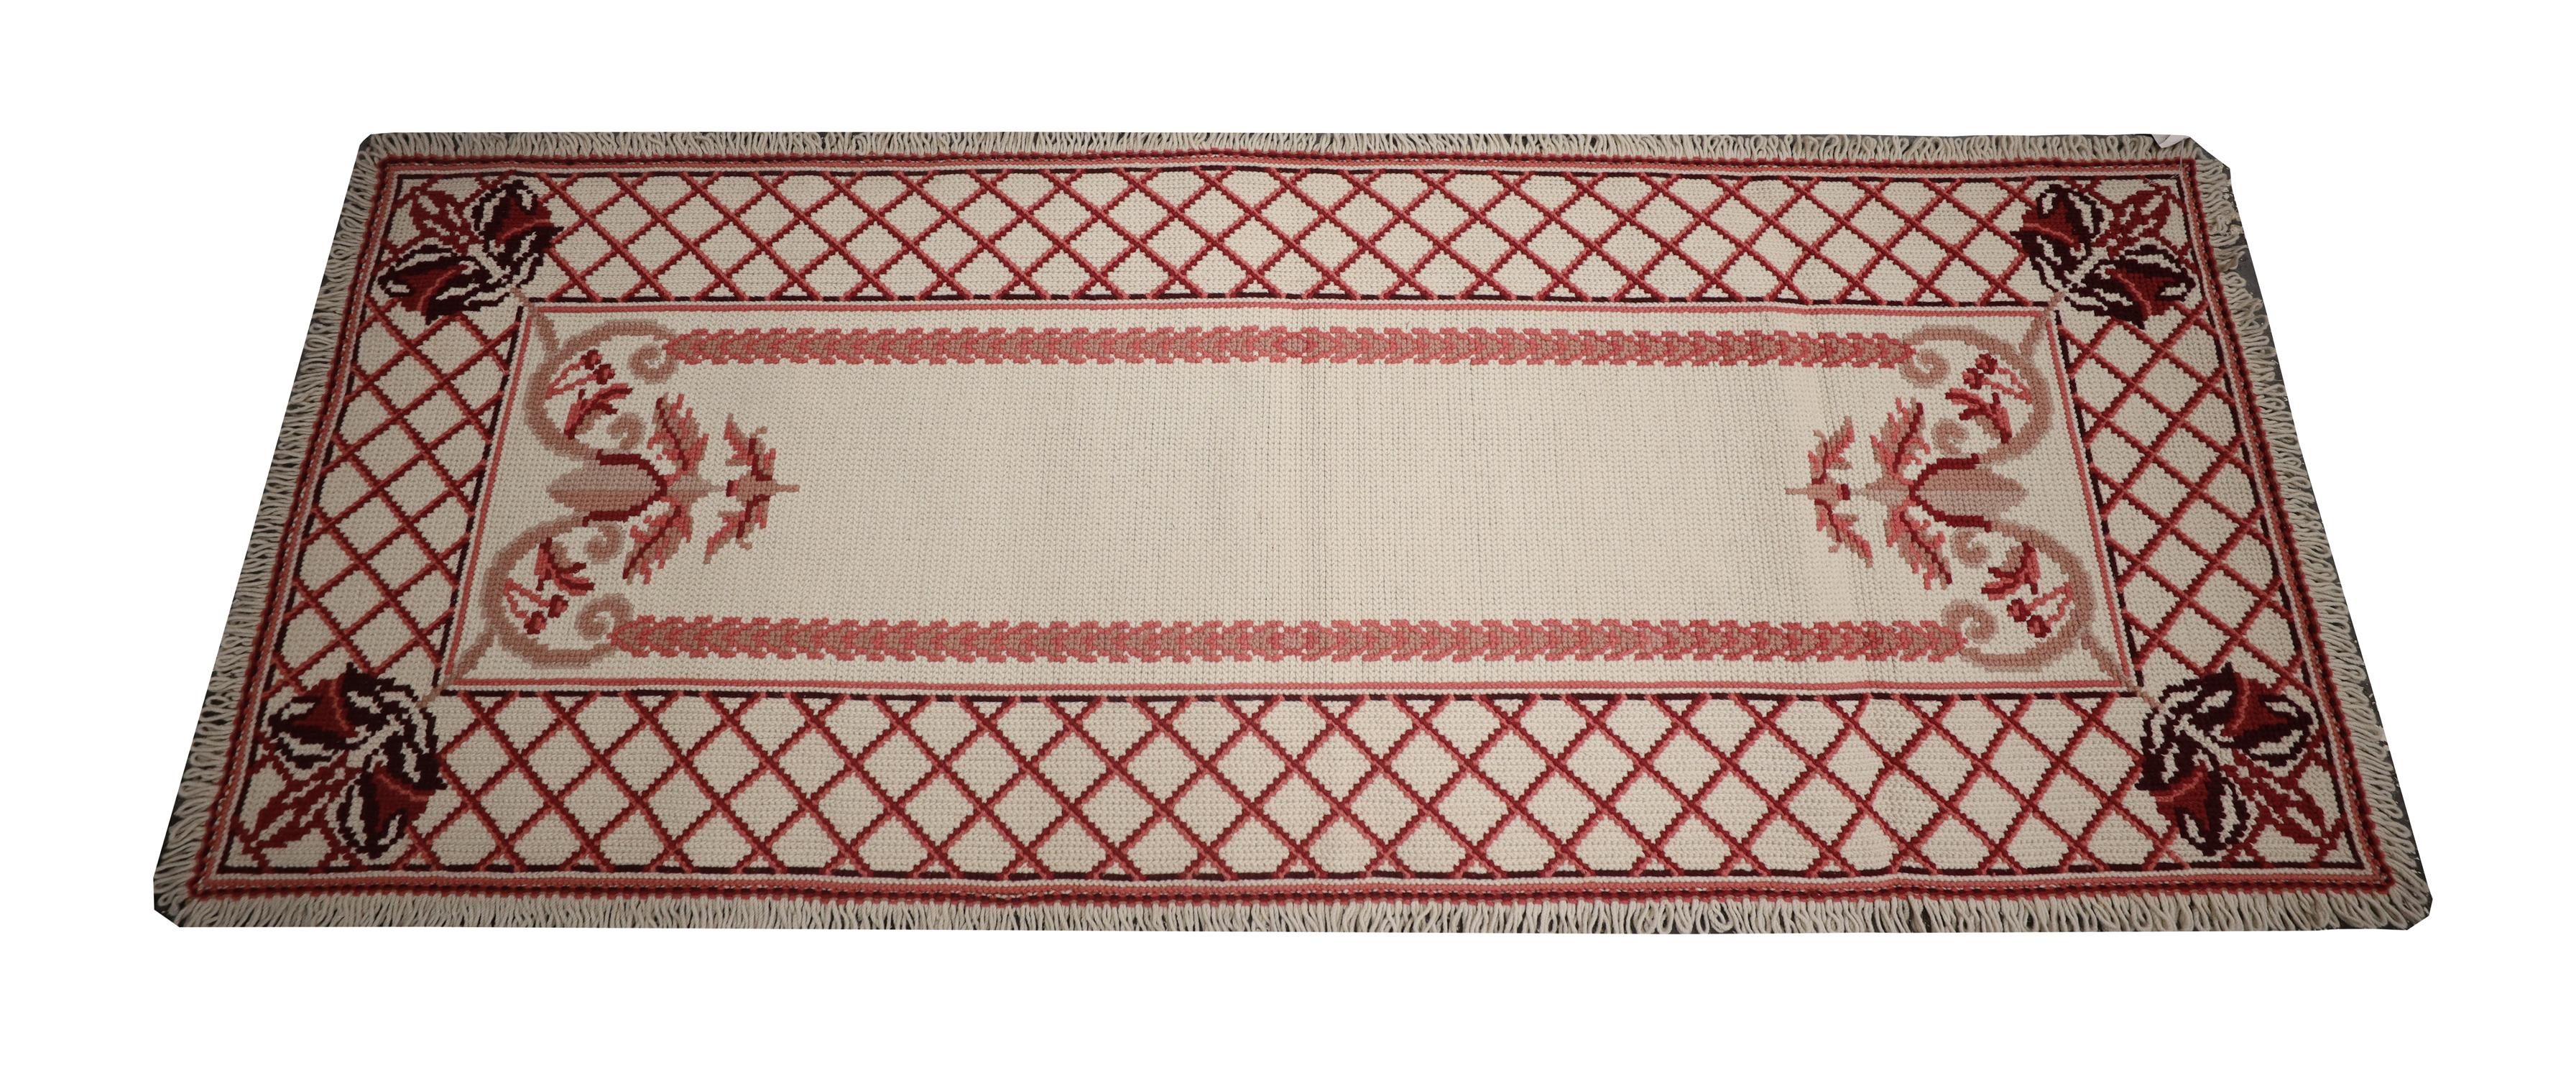 This elegant rug style is popular within Oriental rug shops due to the high demand from both interior designers and homeowners. The design features an open centre field that has been decorated with asymmetrical framing patterns woven in accents of